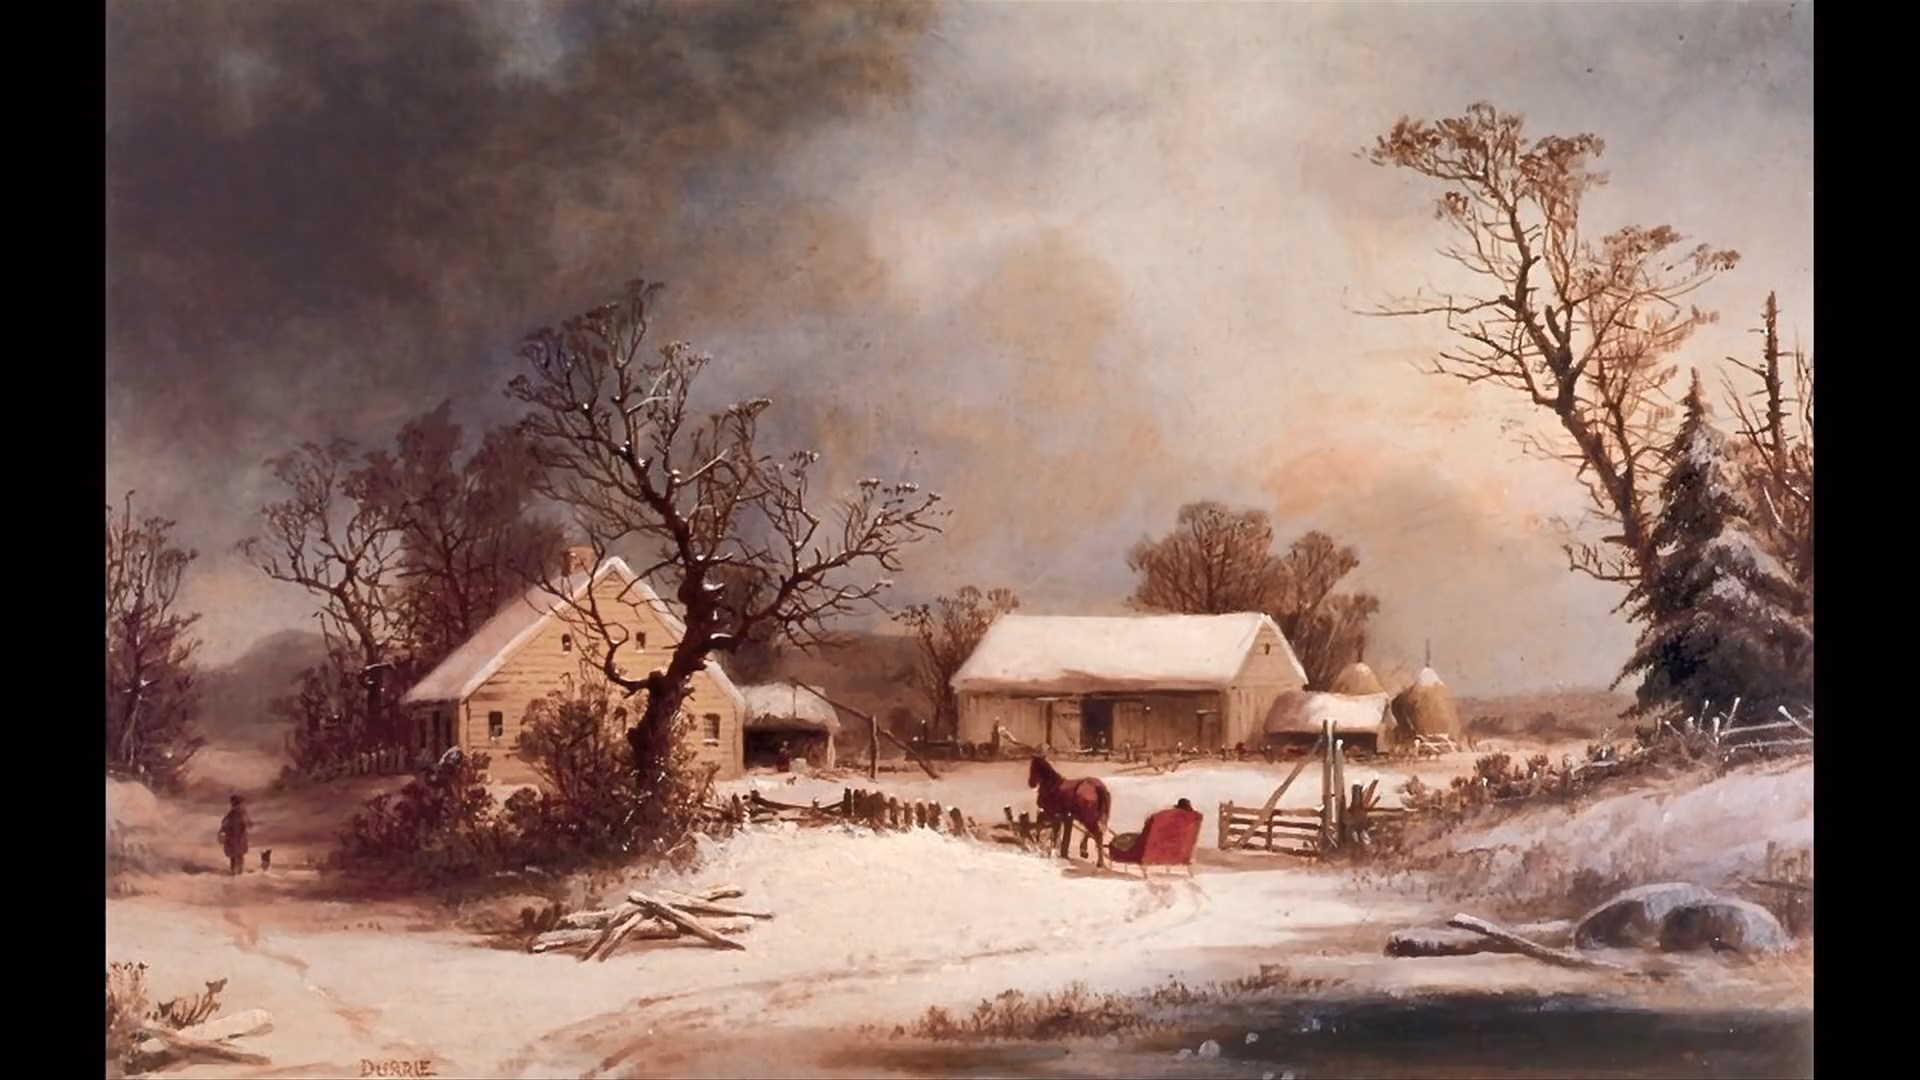 OLD FASHIONED CHRISTMAS AND WINTER SCENES g.jpg